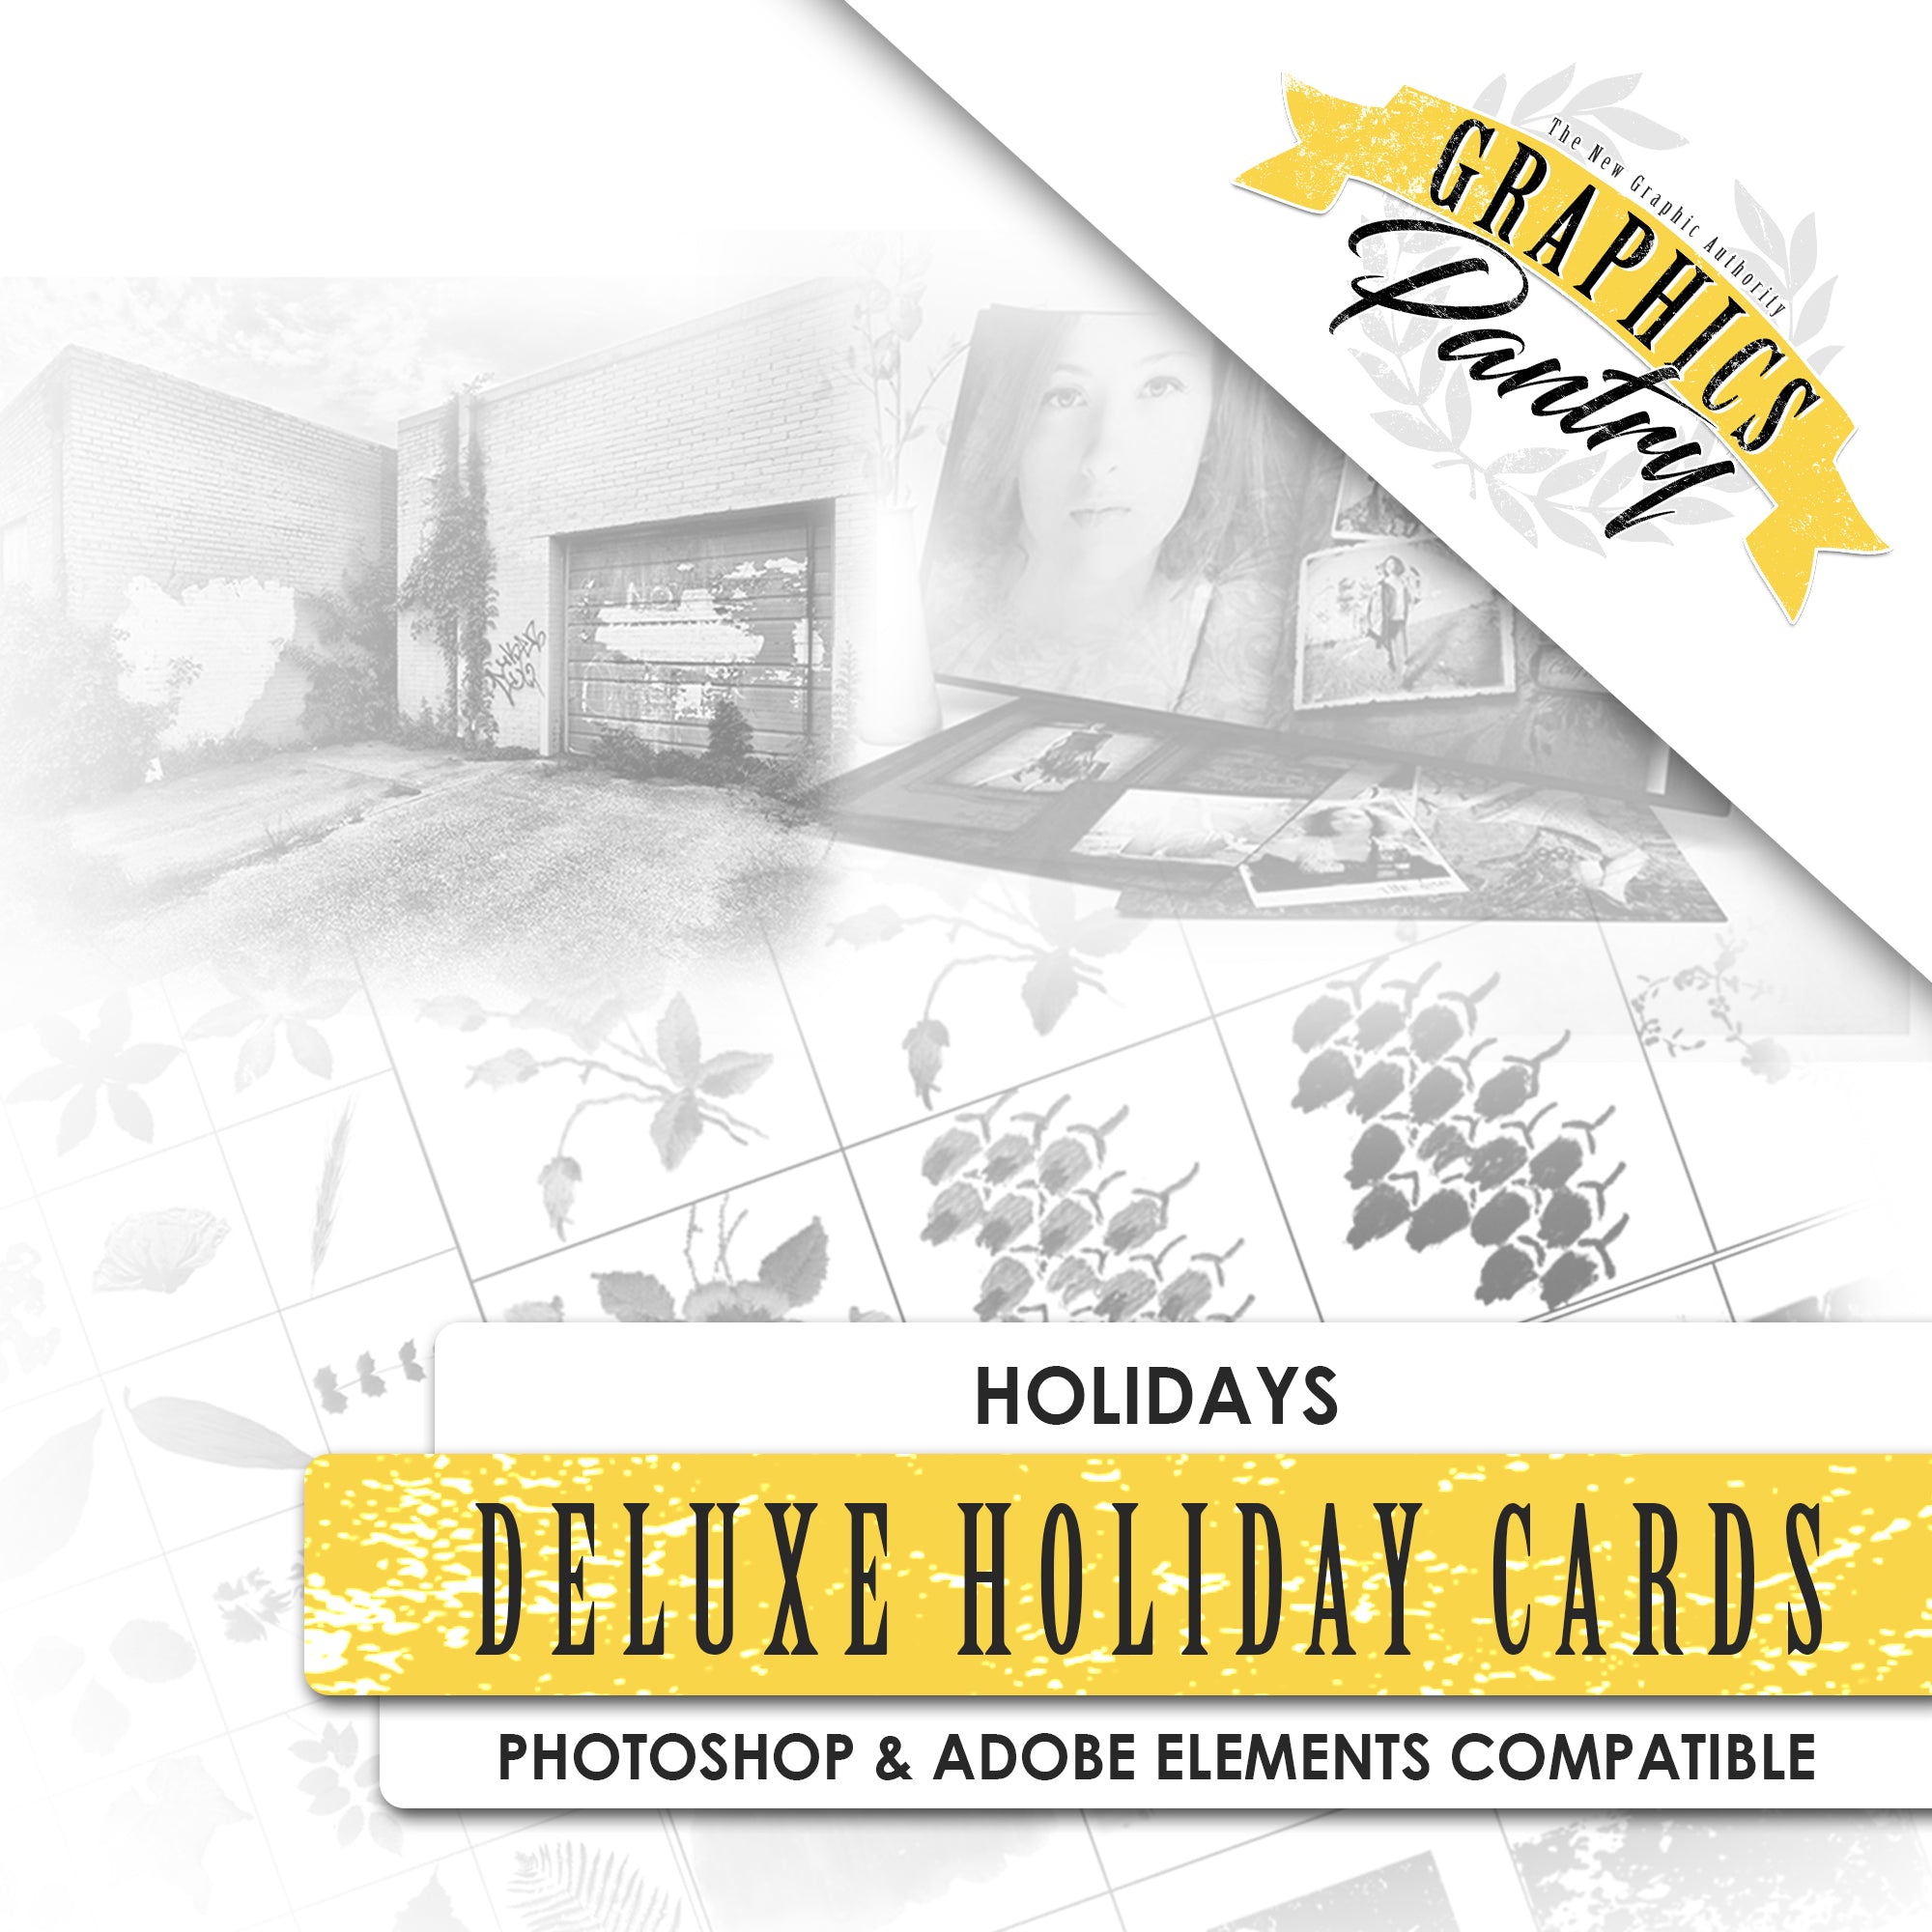 Deluxe Holiday Cards - Bundle